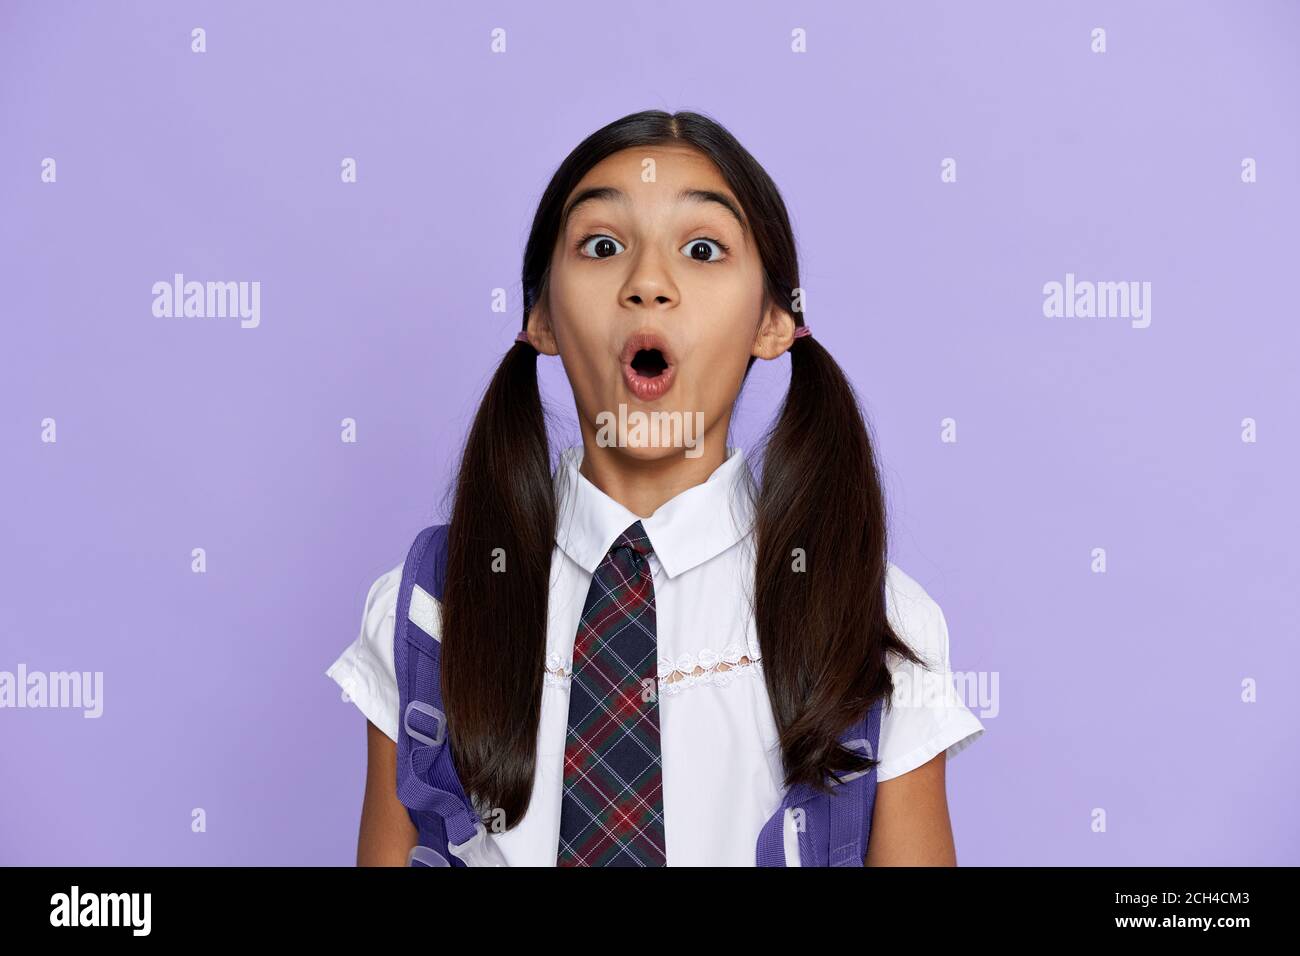 Funny amazed indian school girl looking at camera isolated on violet background. Stock Photo